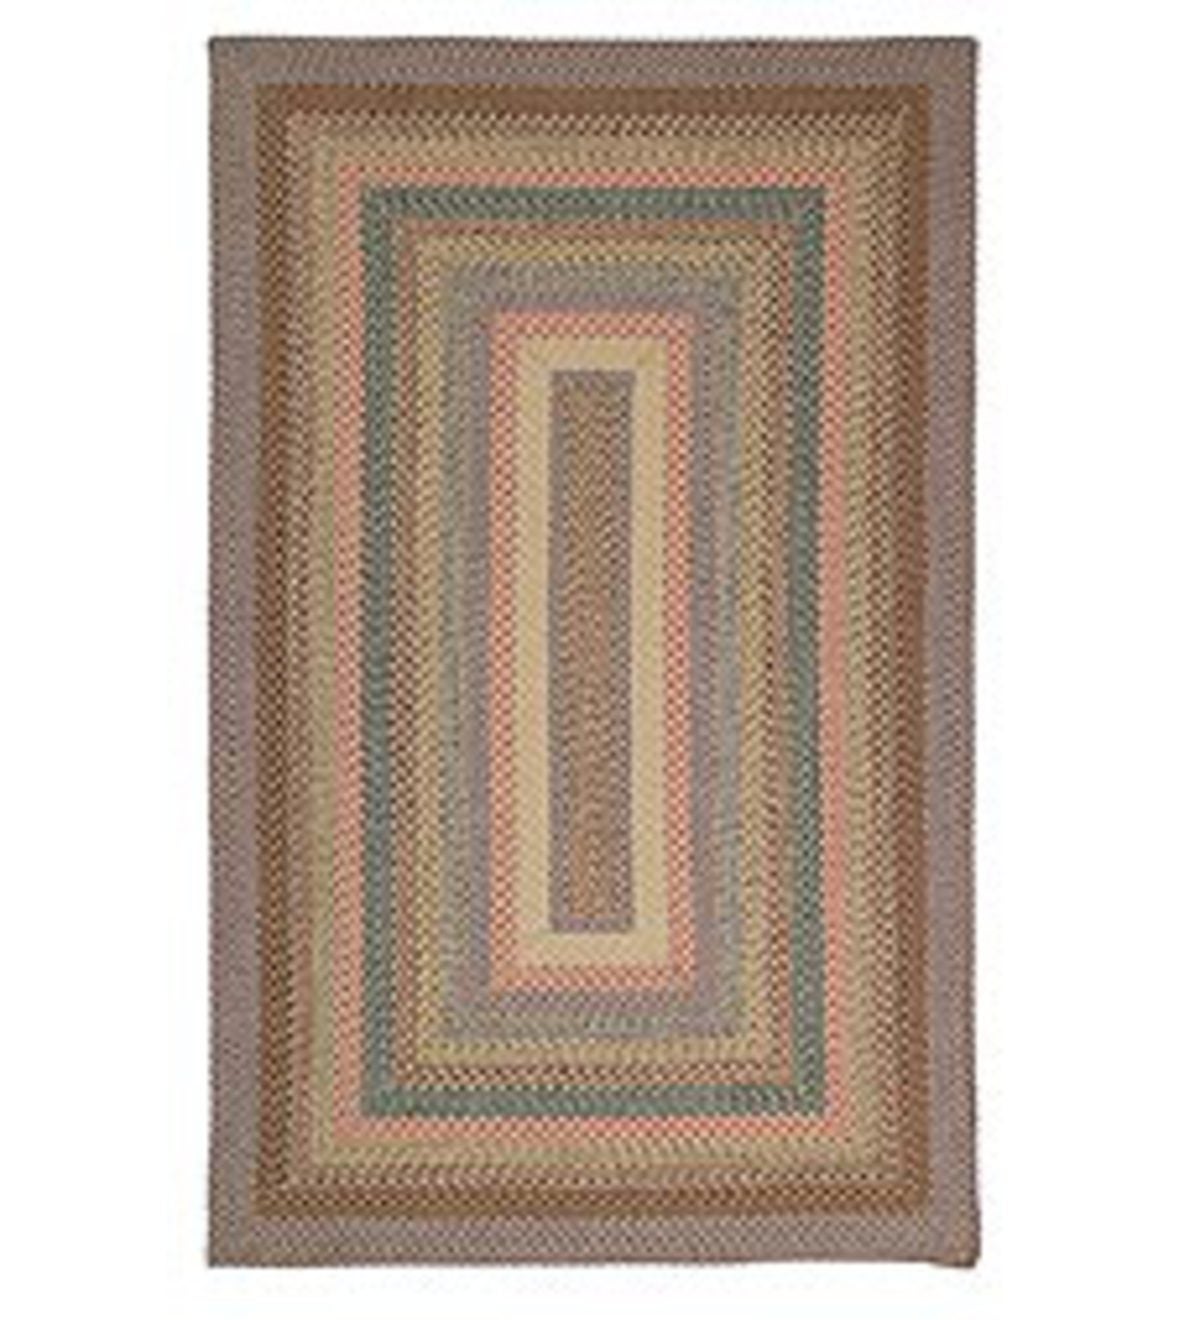 5'W x 8'L Rectangle Indoor/Outdoor Polypropylene Braided Rug - Multi